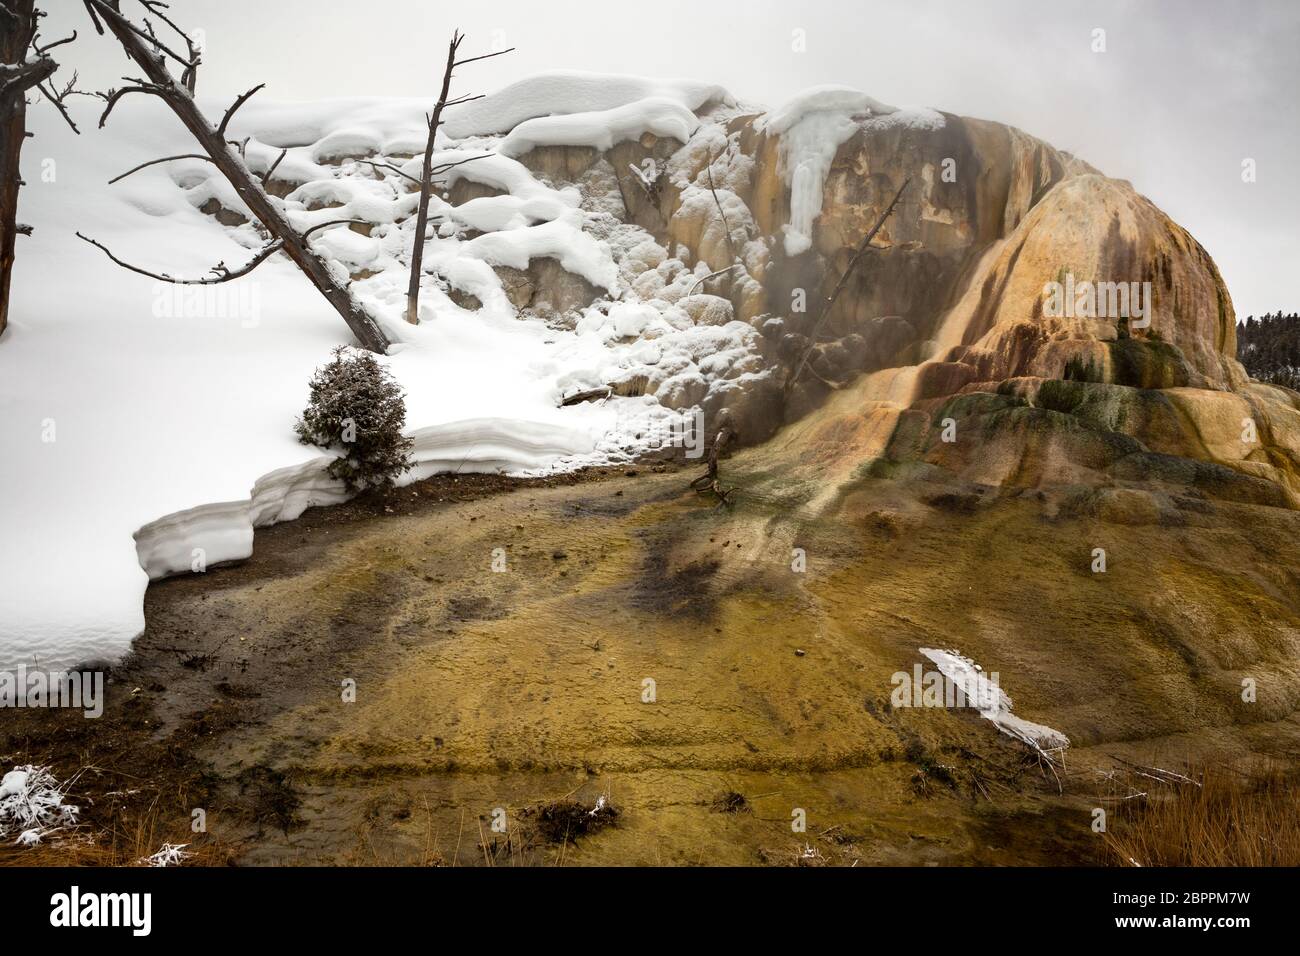 WY04454-00....WYOMING - Foggy morning at Orange Mound in the Upper Terrace area of Mammoth Hot Springs at Yellowstone National Park. Stock Photo